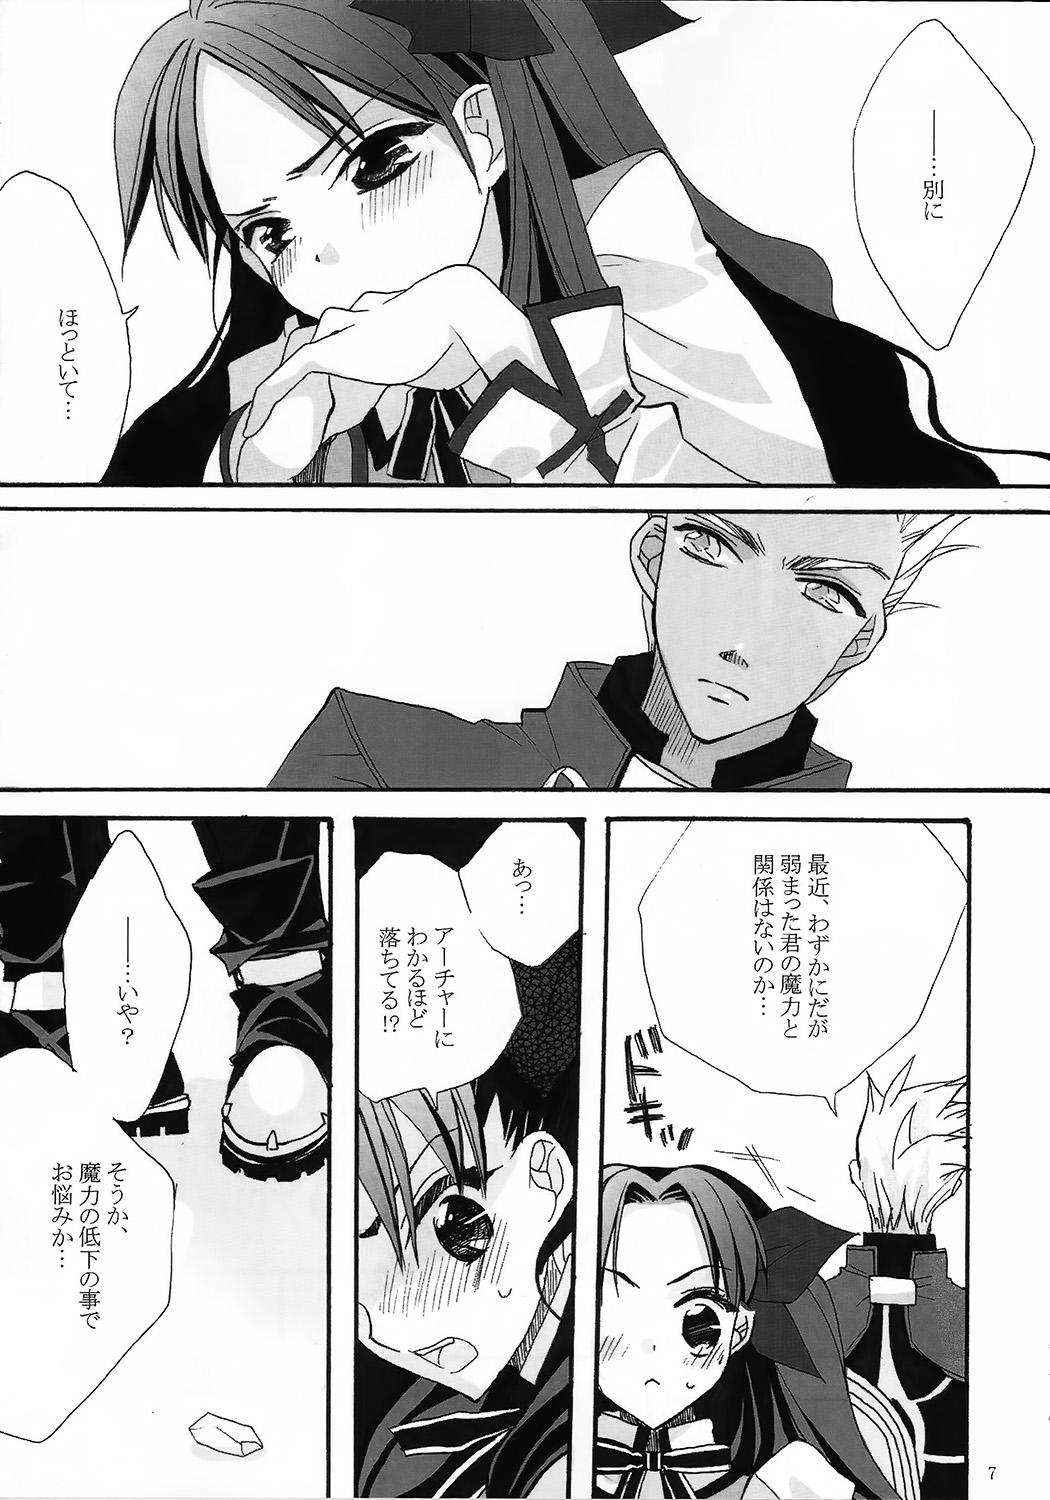 Hotwife RED ZONE - Fate stay night Body Massage - Page 5